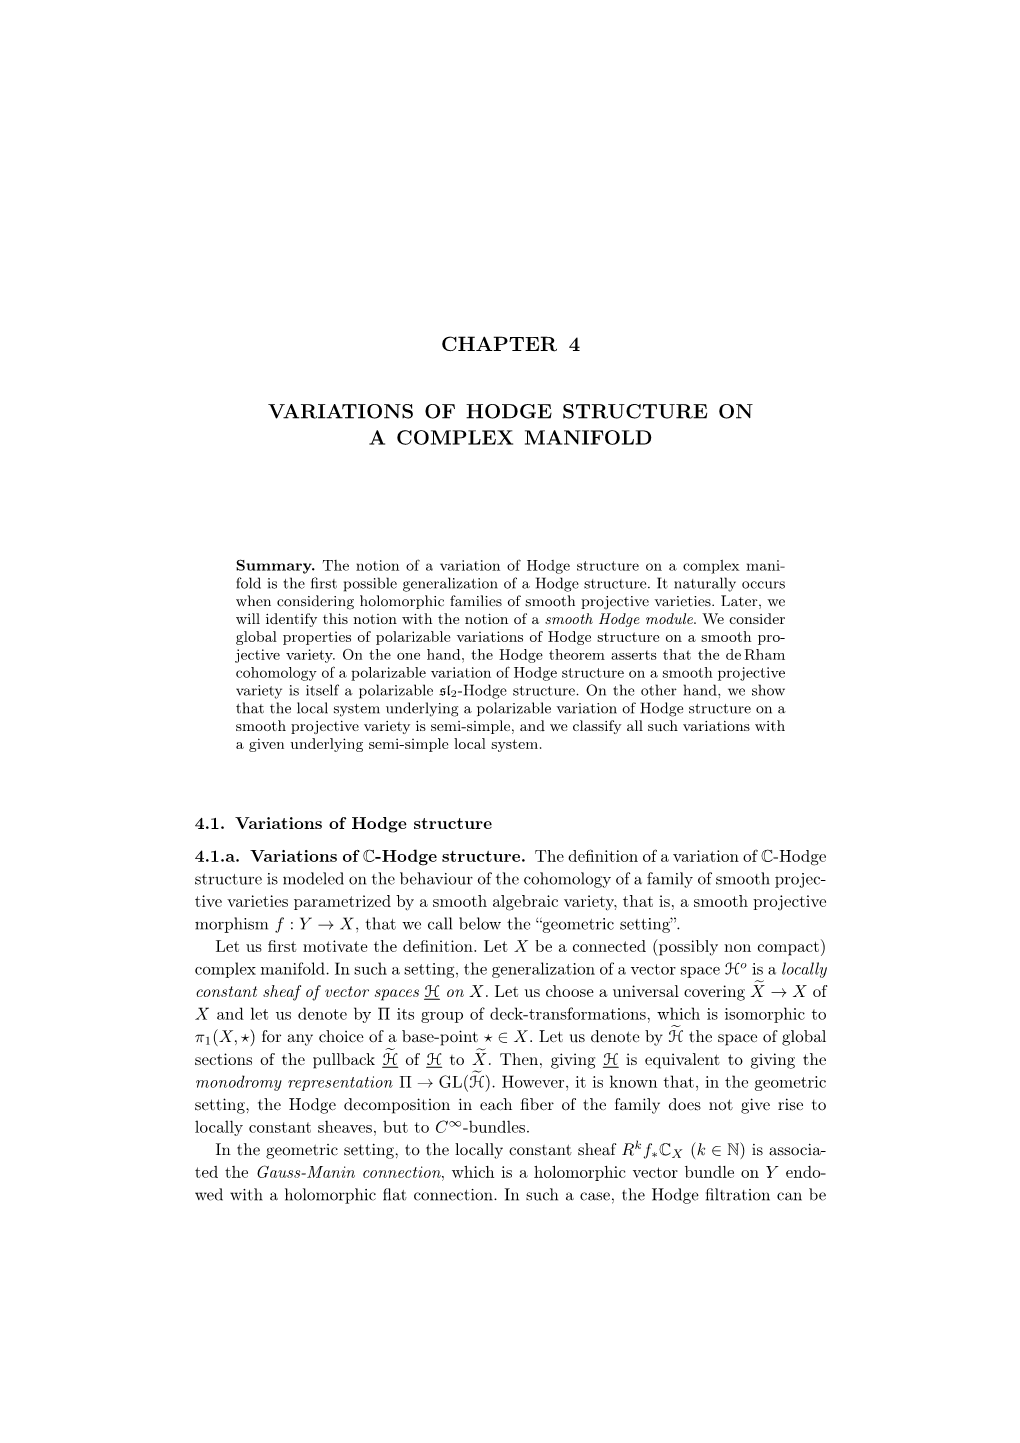 Chapter 4 Variations of Hodge Structure on a Complex Manifold